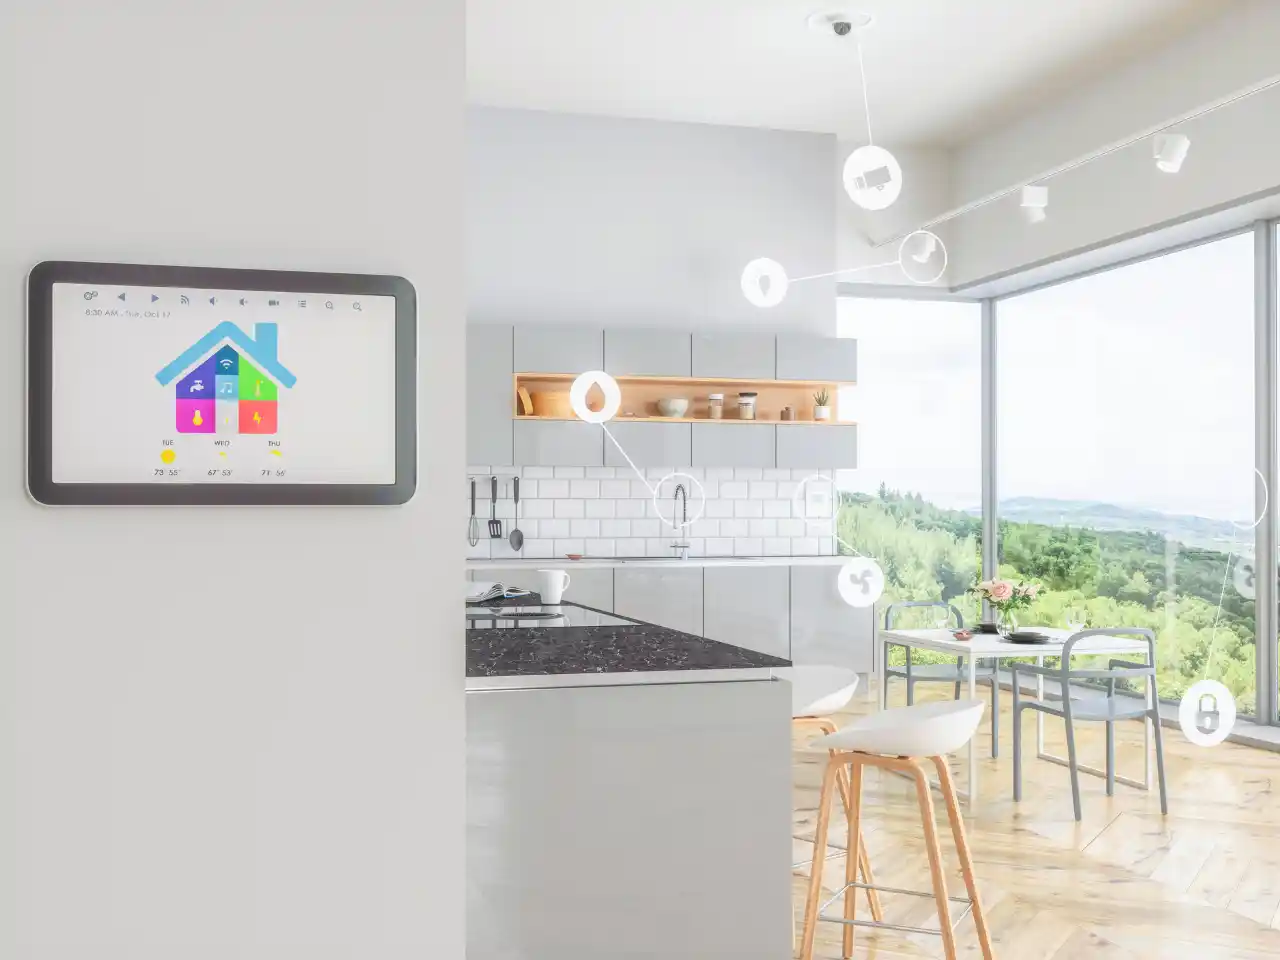 Smart homes have great features